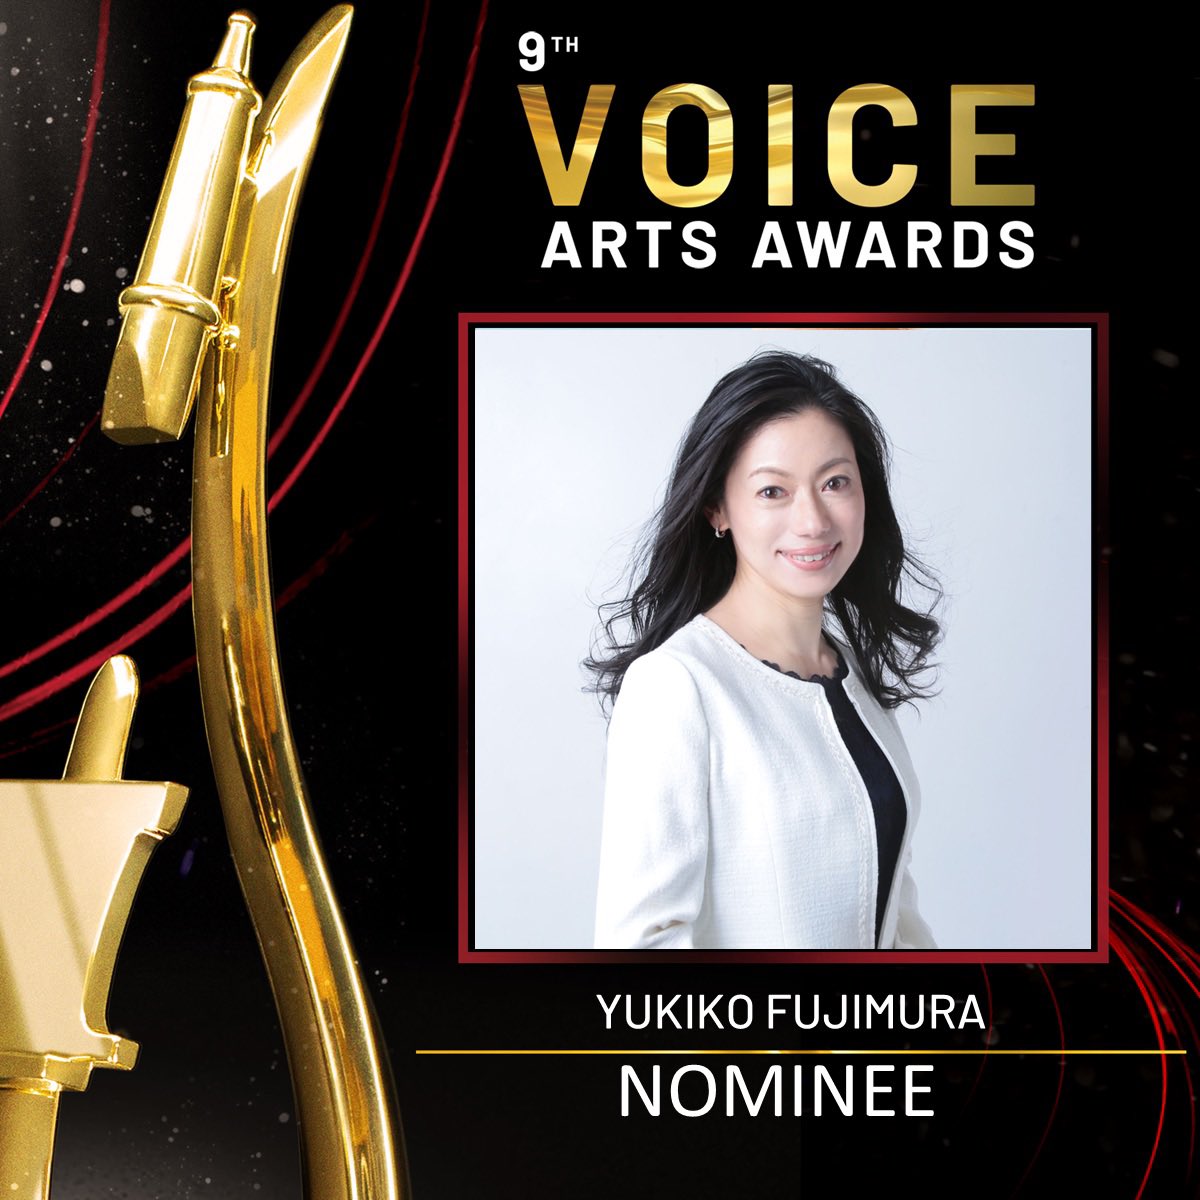 Wow! It's such an amazing news to me!! It is my great pleasure and honor to be nominated for the Outstanding Body of Work - International - Best Voiceover!! Thank you to all who supported me and to @SovasVoice @VoiceArtsAward , and congratulations to all the nominees!